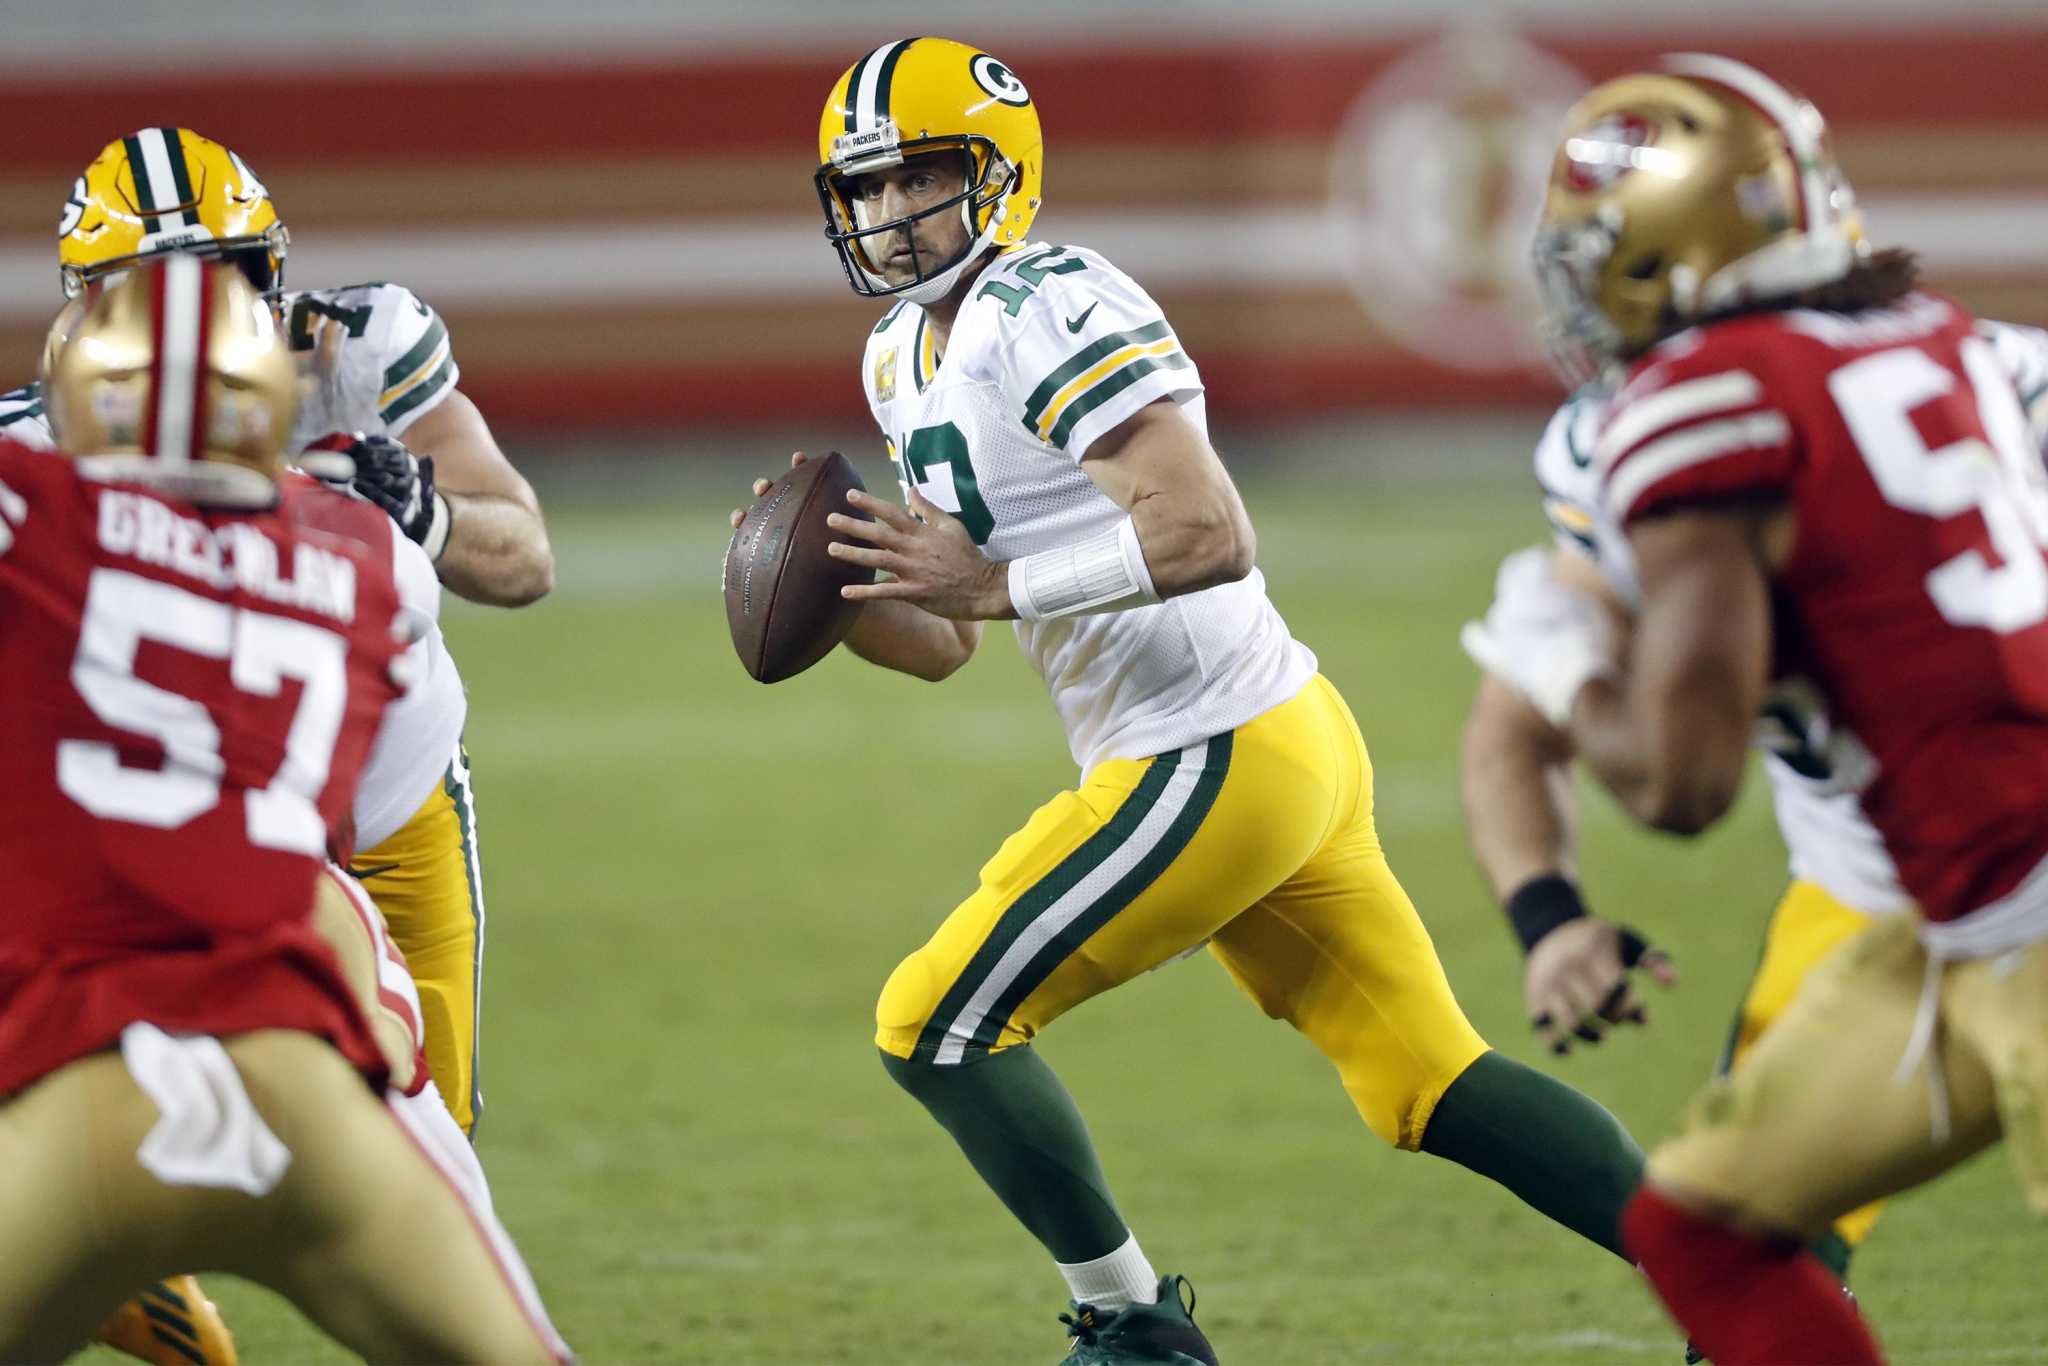 Rodgers bests Brees as Packers roll past Saints on Sunday Night Football, NFL